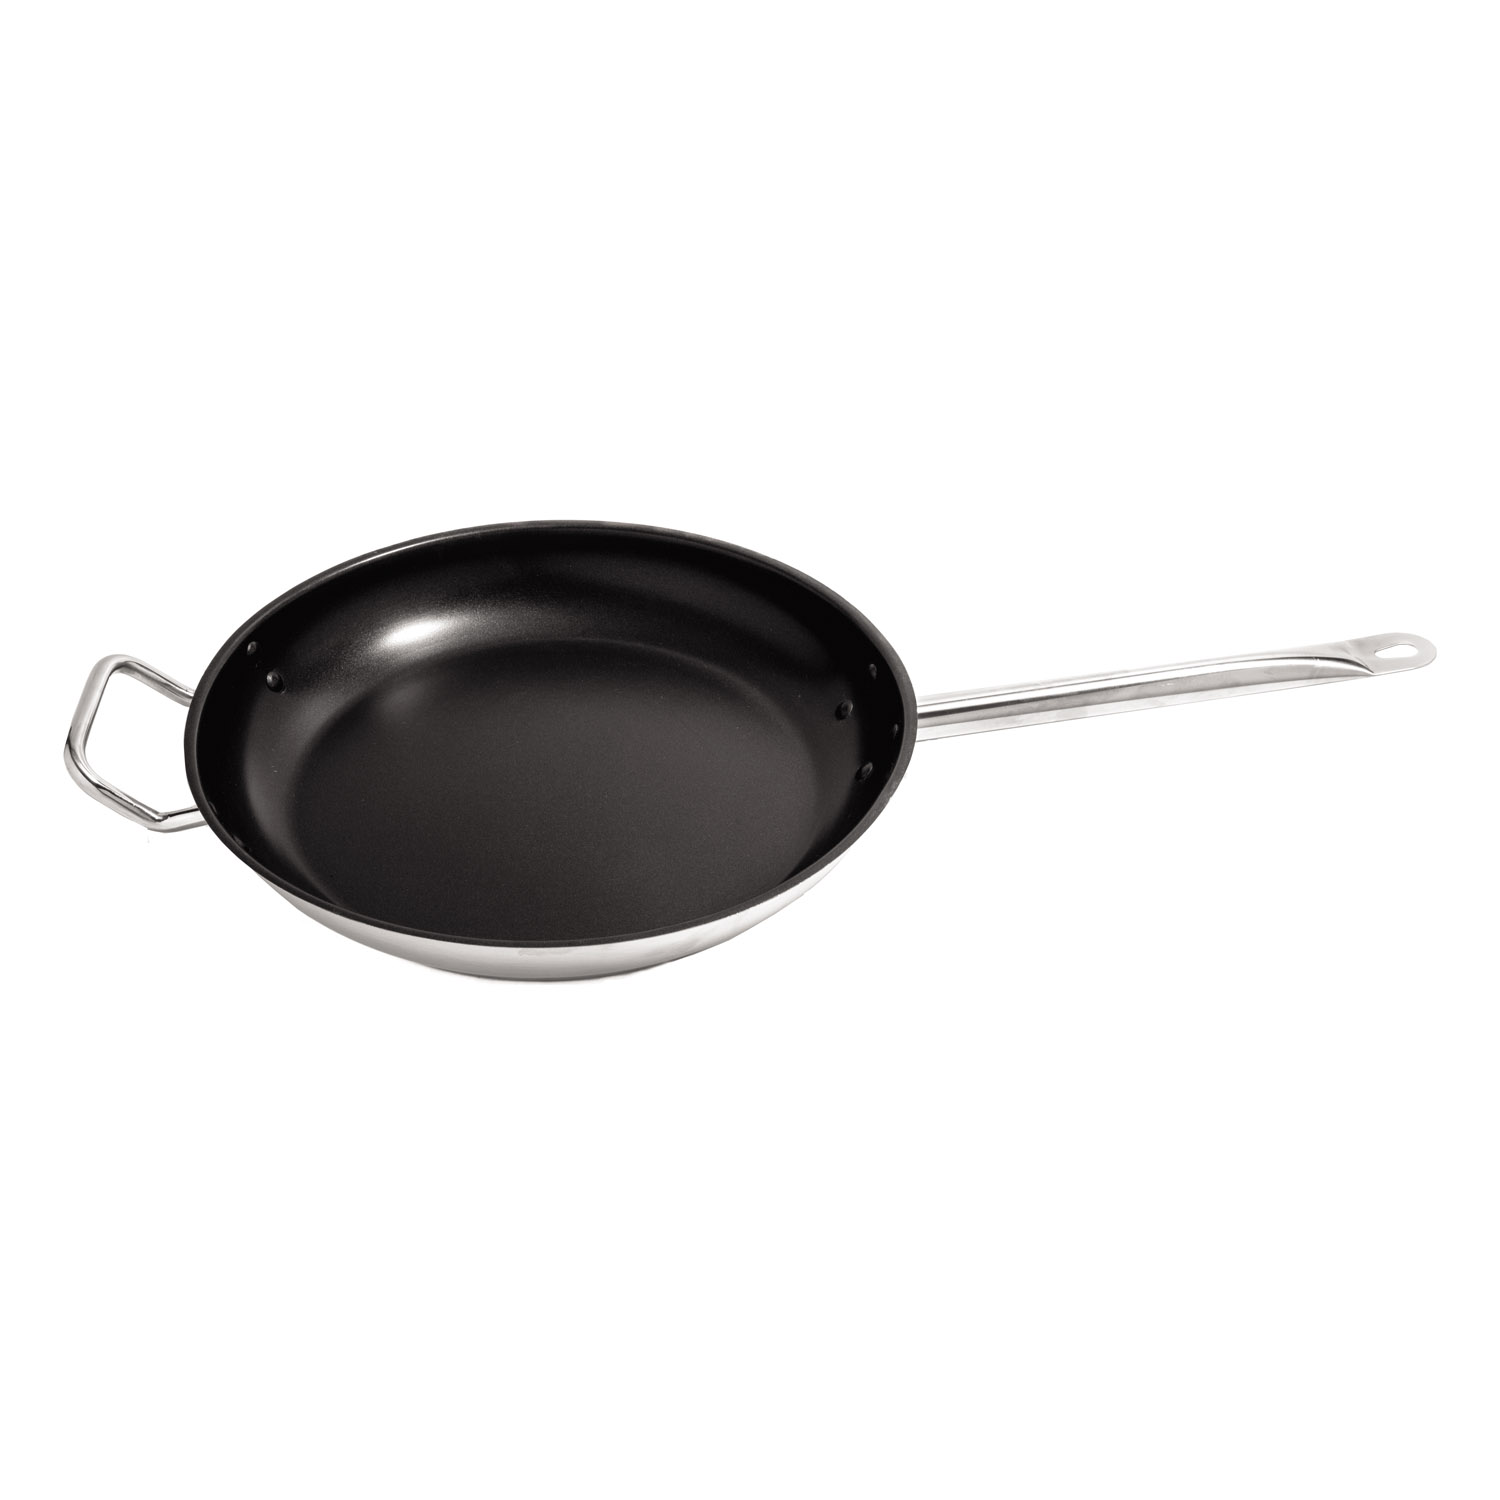 CAC China S2FP-12HN Stainless Steel Non-Stick with Helper Handle Fry Pan 12"